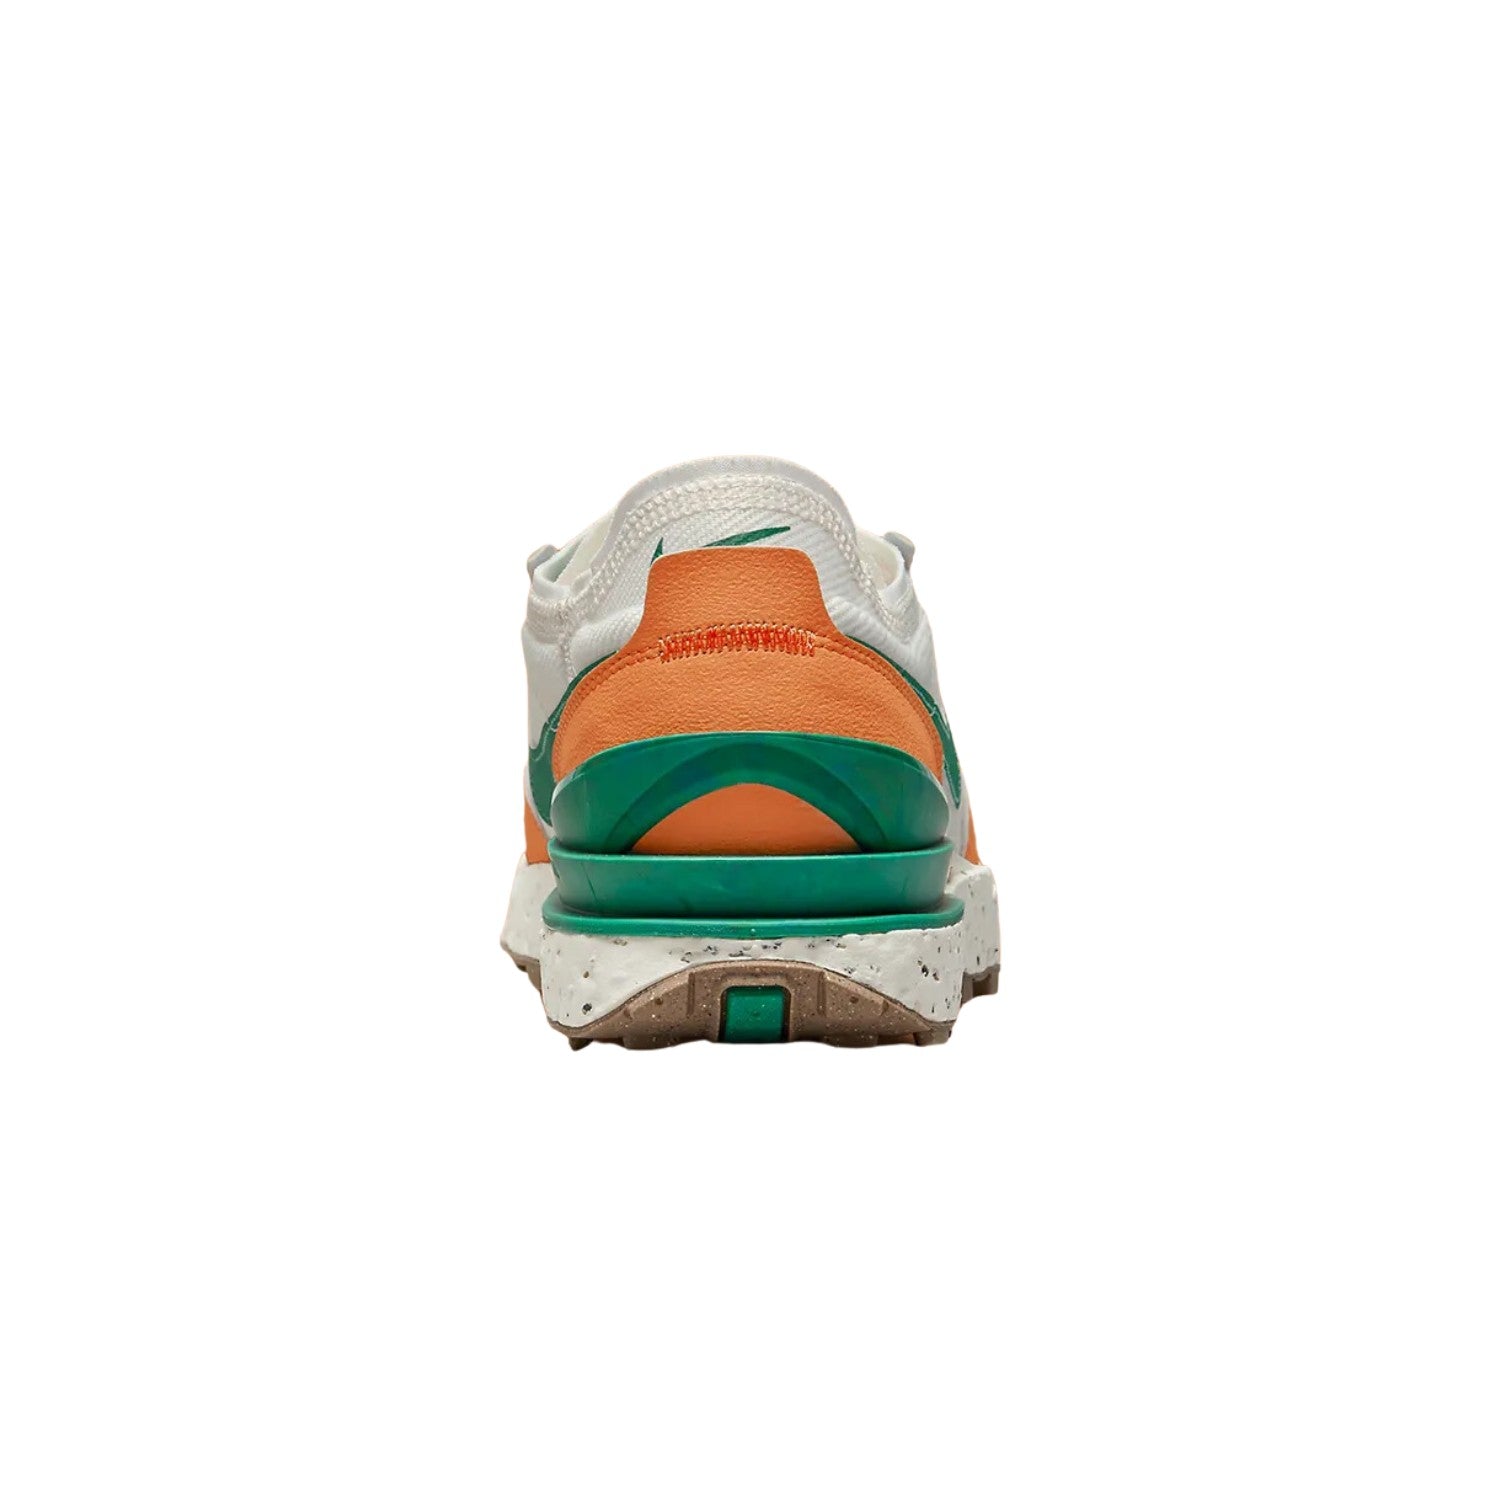 Nike Waffle One Crater Nn Womens Style : Dq4491